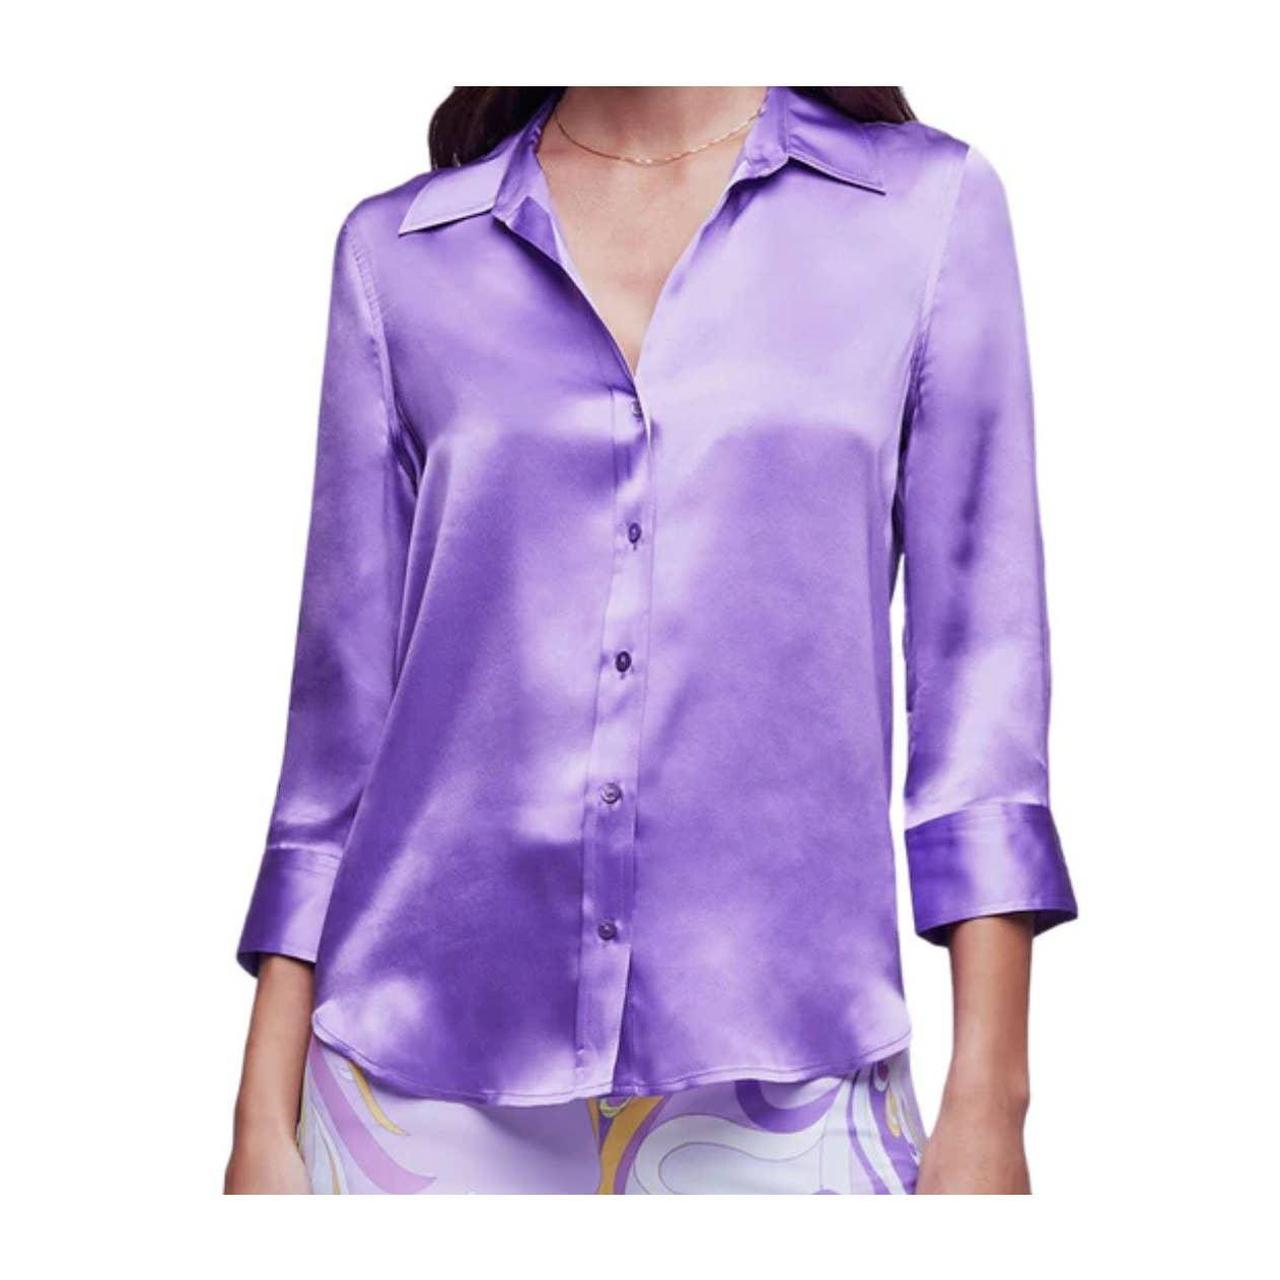 Elevate your style with our Basic Silk Shirt